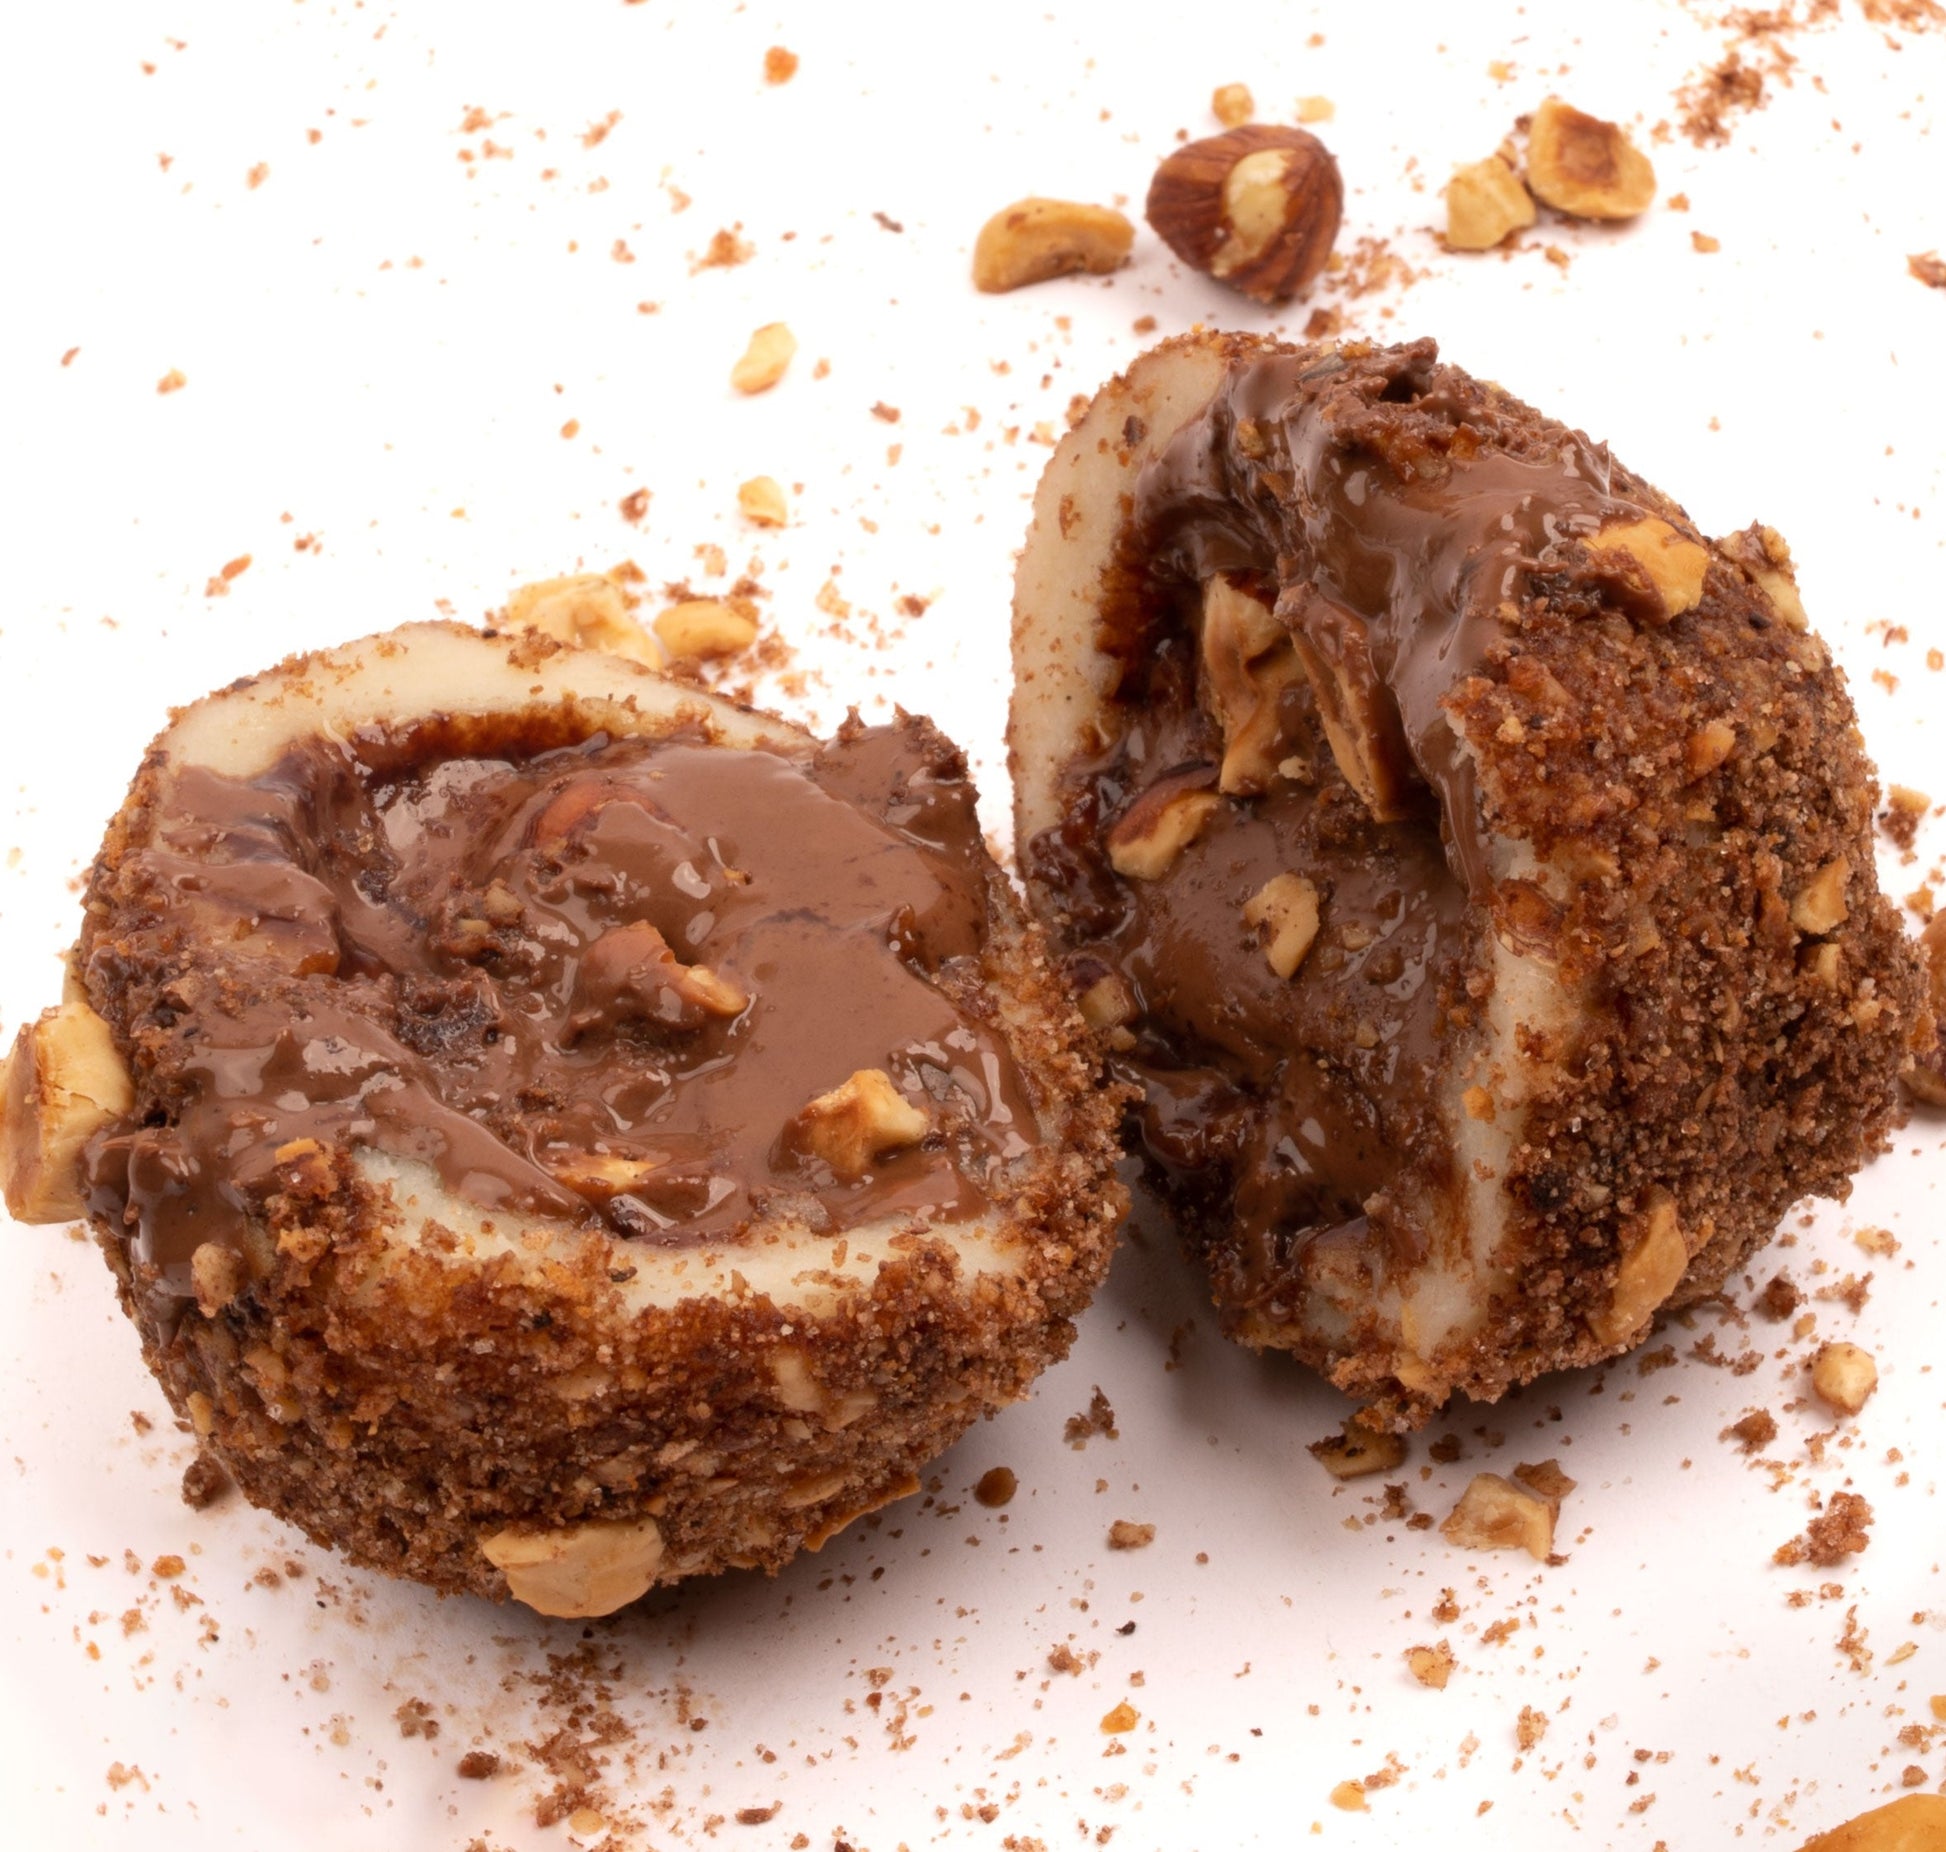 Nutella knedla is made for chocolate lovers.   We start by filling our signature potato dough with the original Nutella spread known for its rich taste of hazelnut and chocolate. We then hand-make a knedla ball and coat it with more hazelnuts and cacao! Scrumptious!